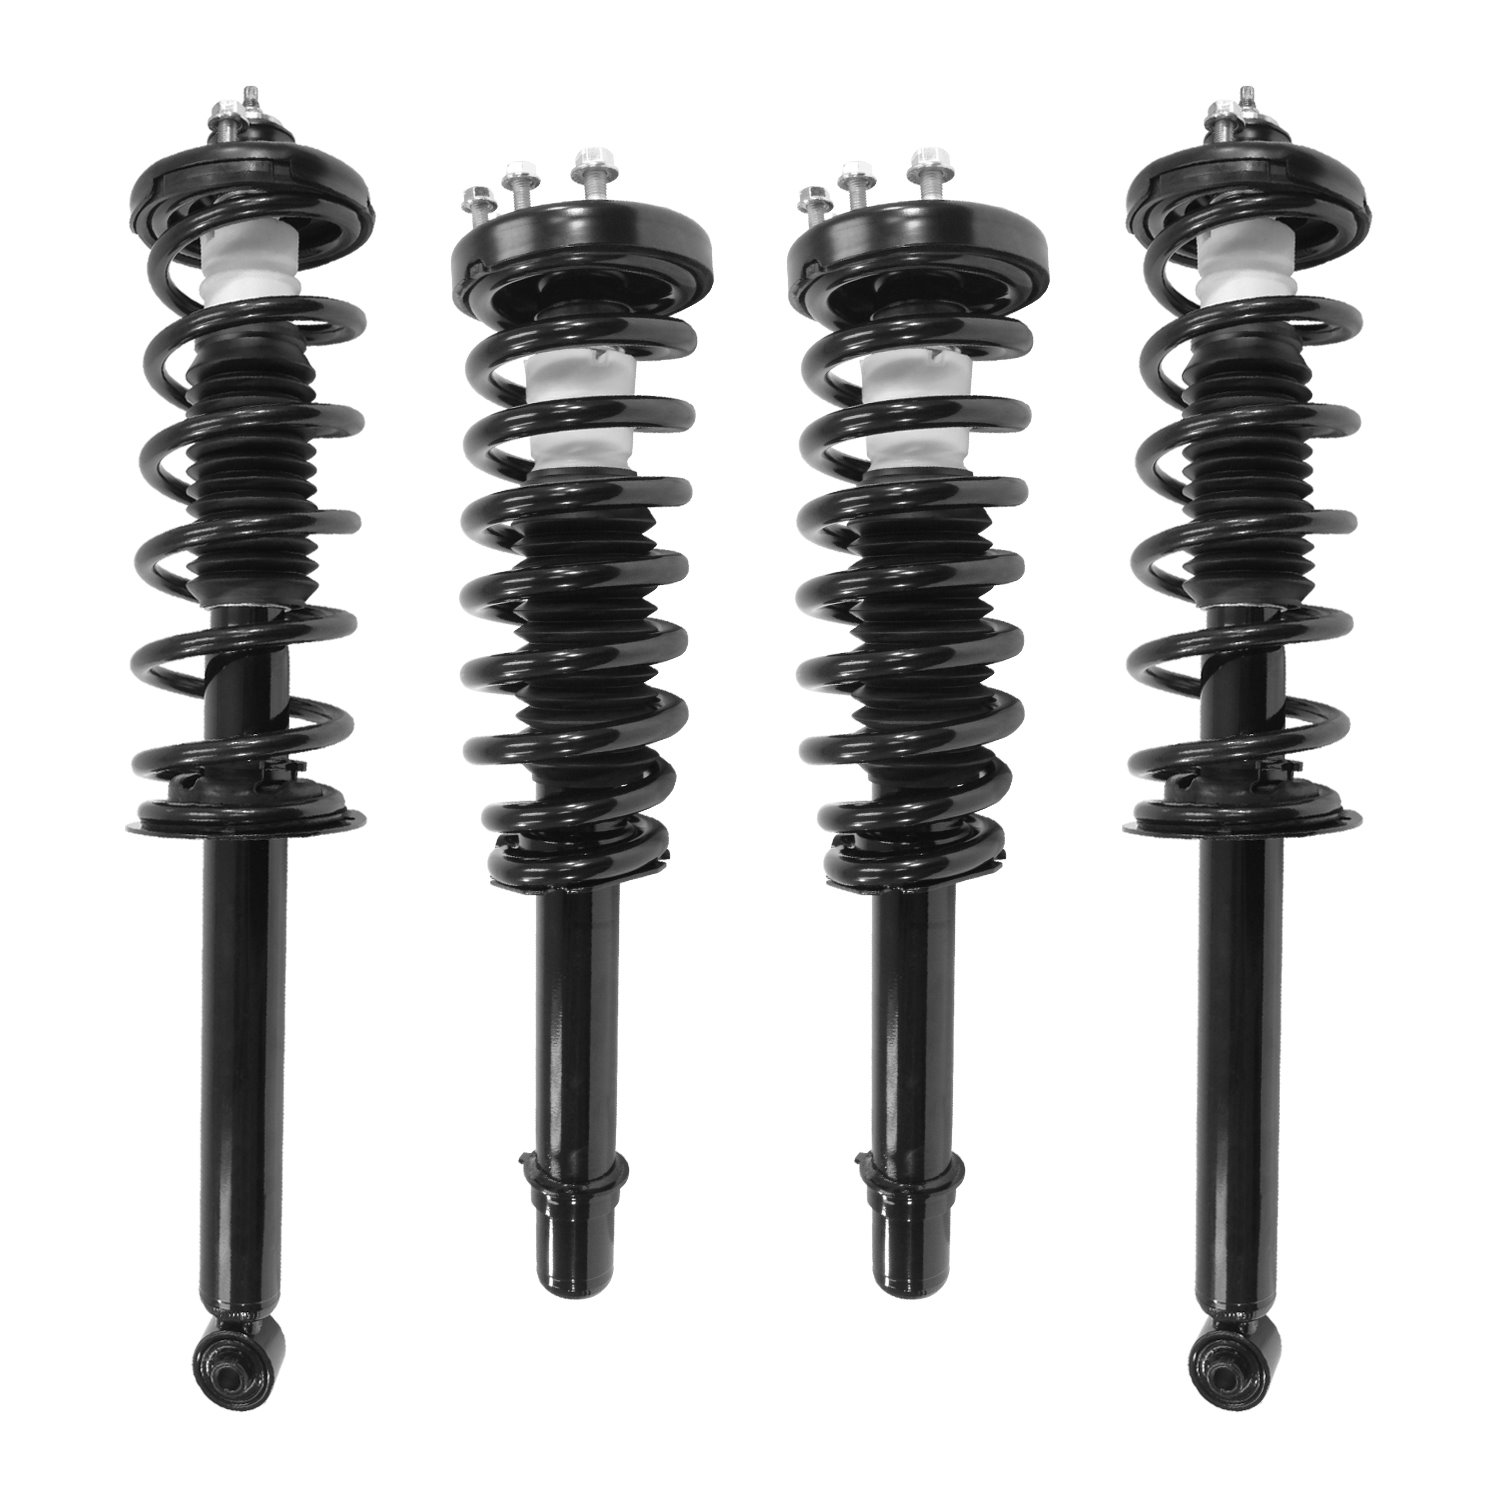 4-13103-16040-001 Front & Rear Suspension Strut & Coil Spring Assemby Set Fits Select Acura TSX